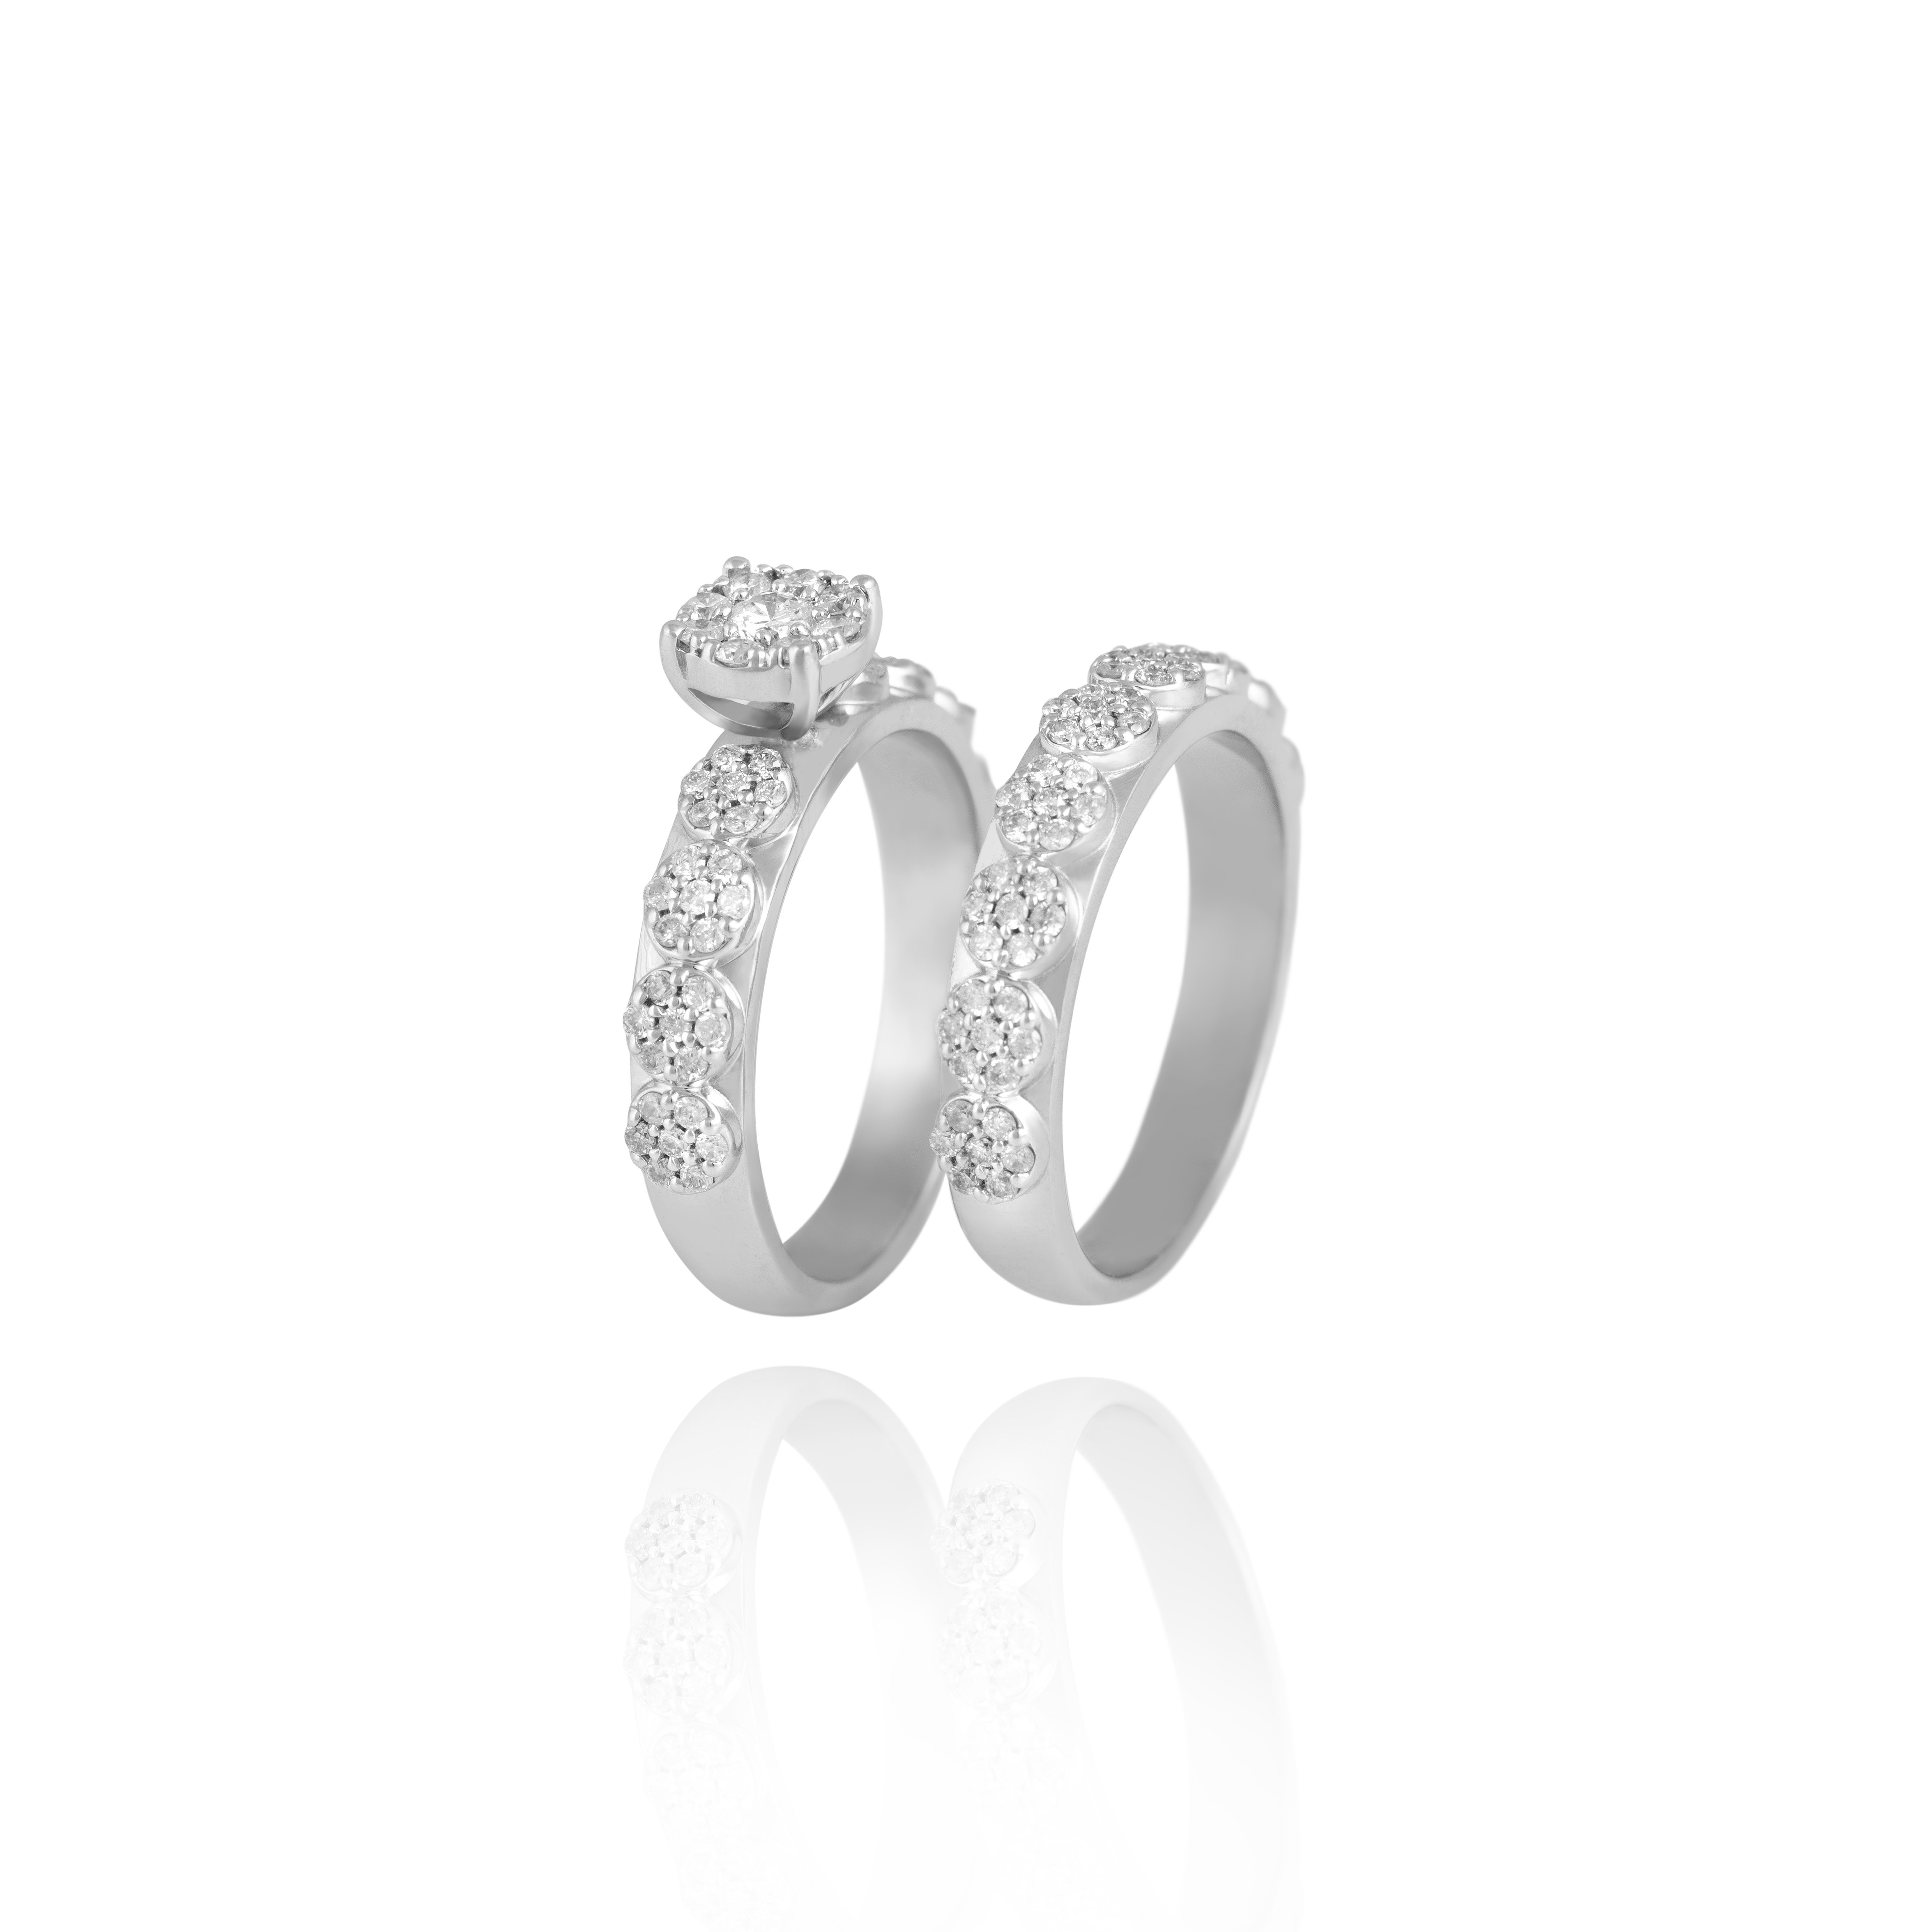 Engagement Rings - Online Jewelery Store In Lebanon - Zoughaib & Co Jewelery